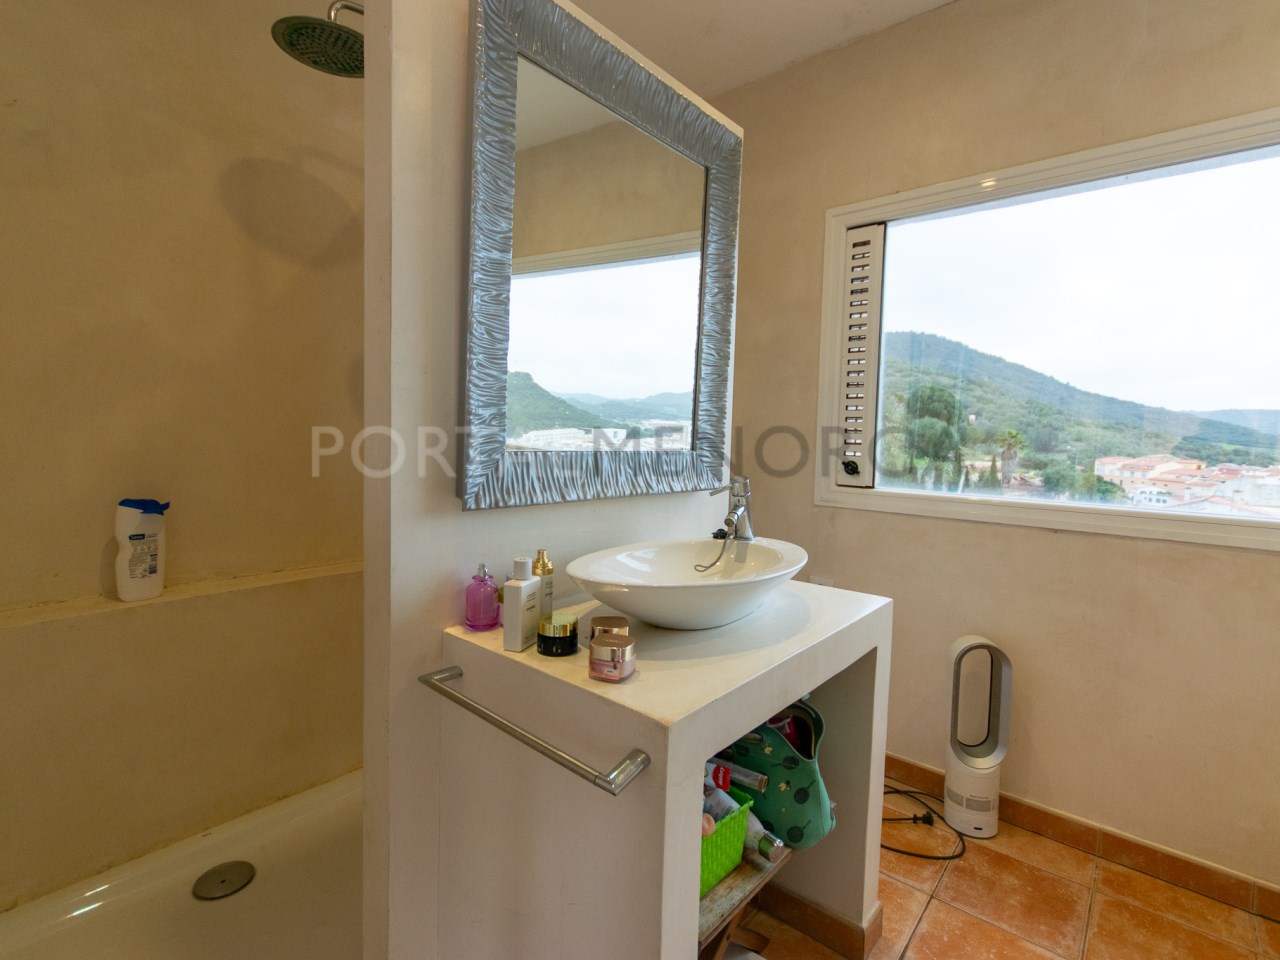 En-suite bathroom of charming house with grounds and views of the village of Ferreries